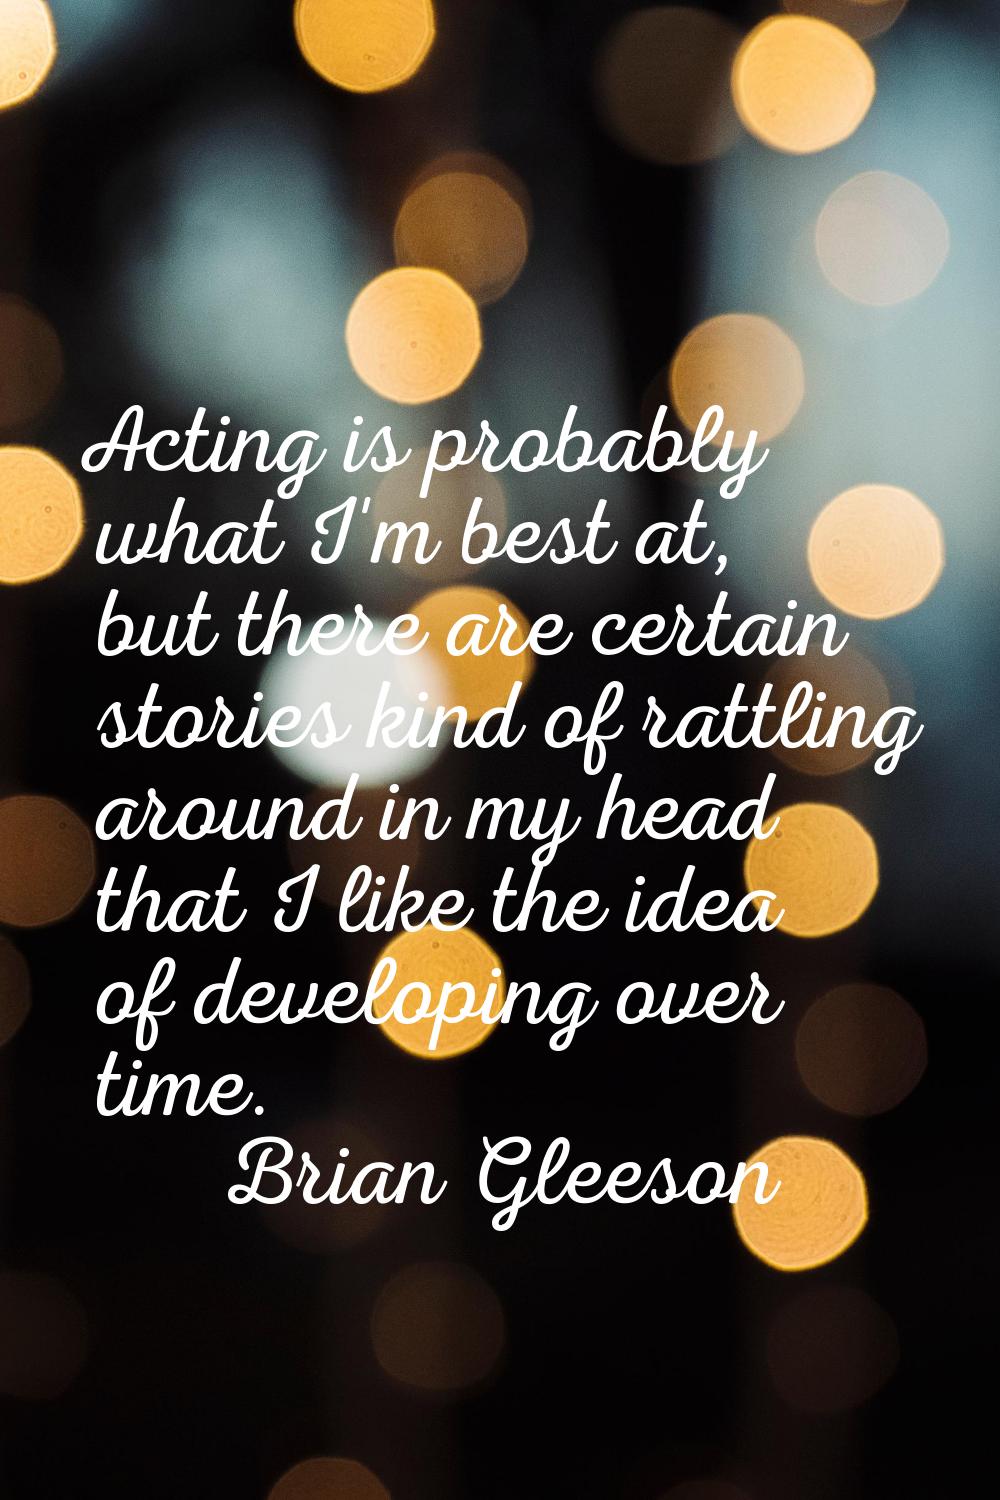 Acting is probably what I'm best at, but there are certain stories kind of rattling around in my he